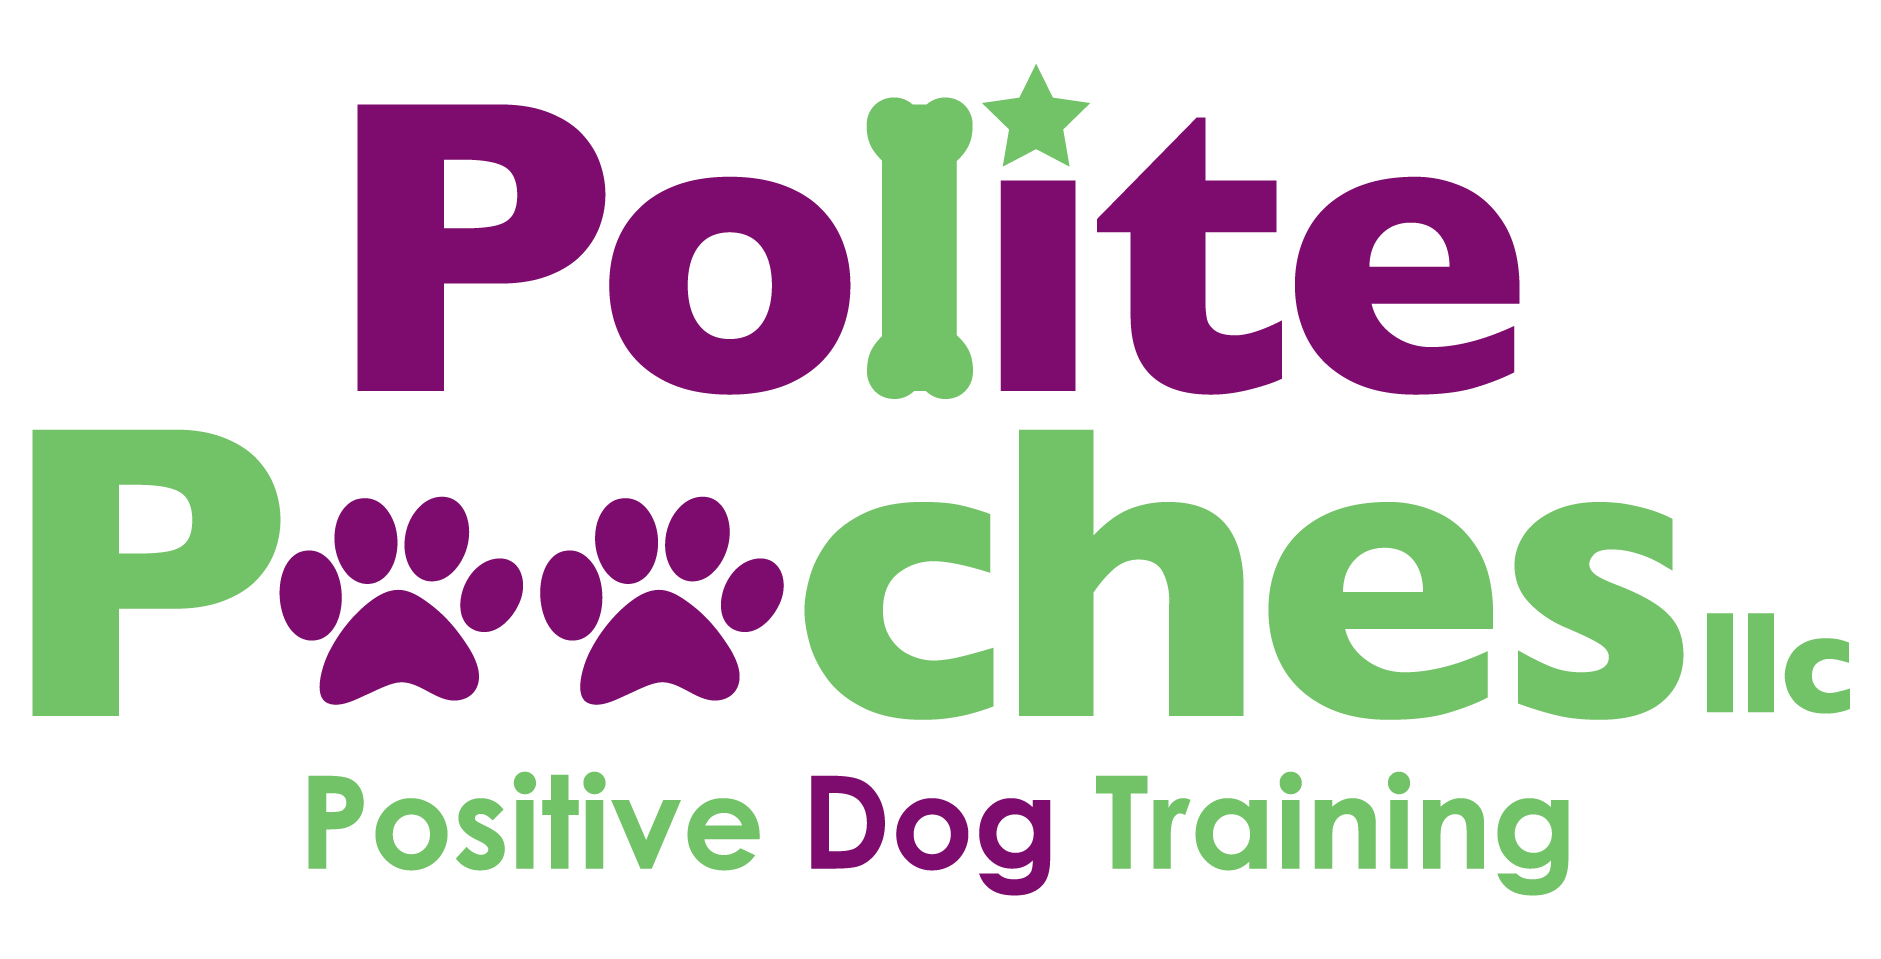 Polite Pooches Positive Dog Training